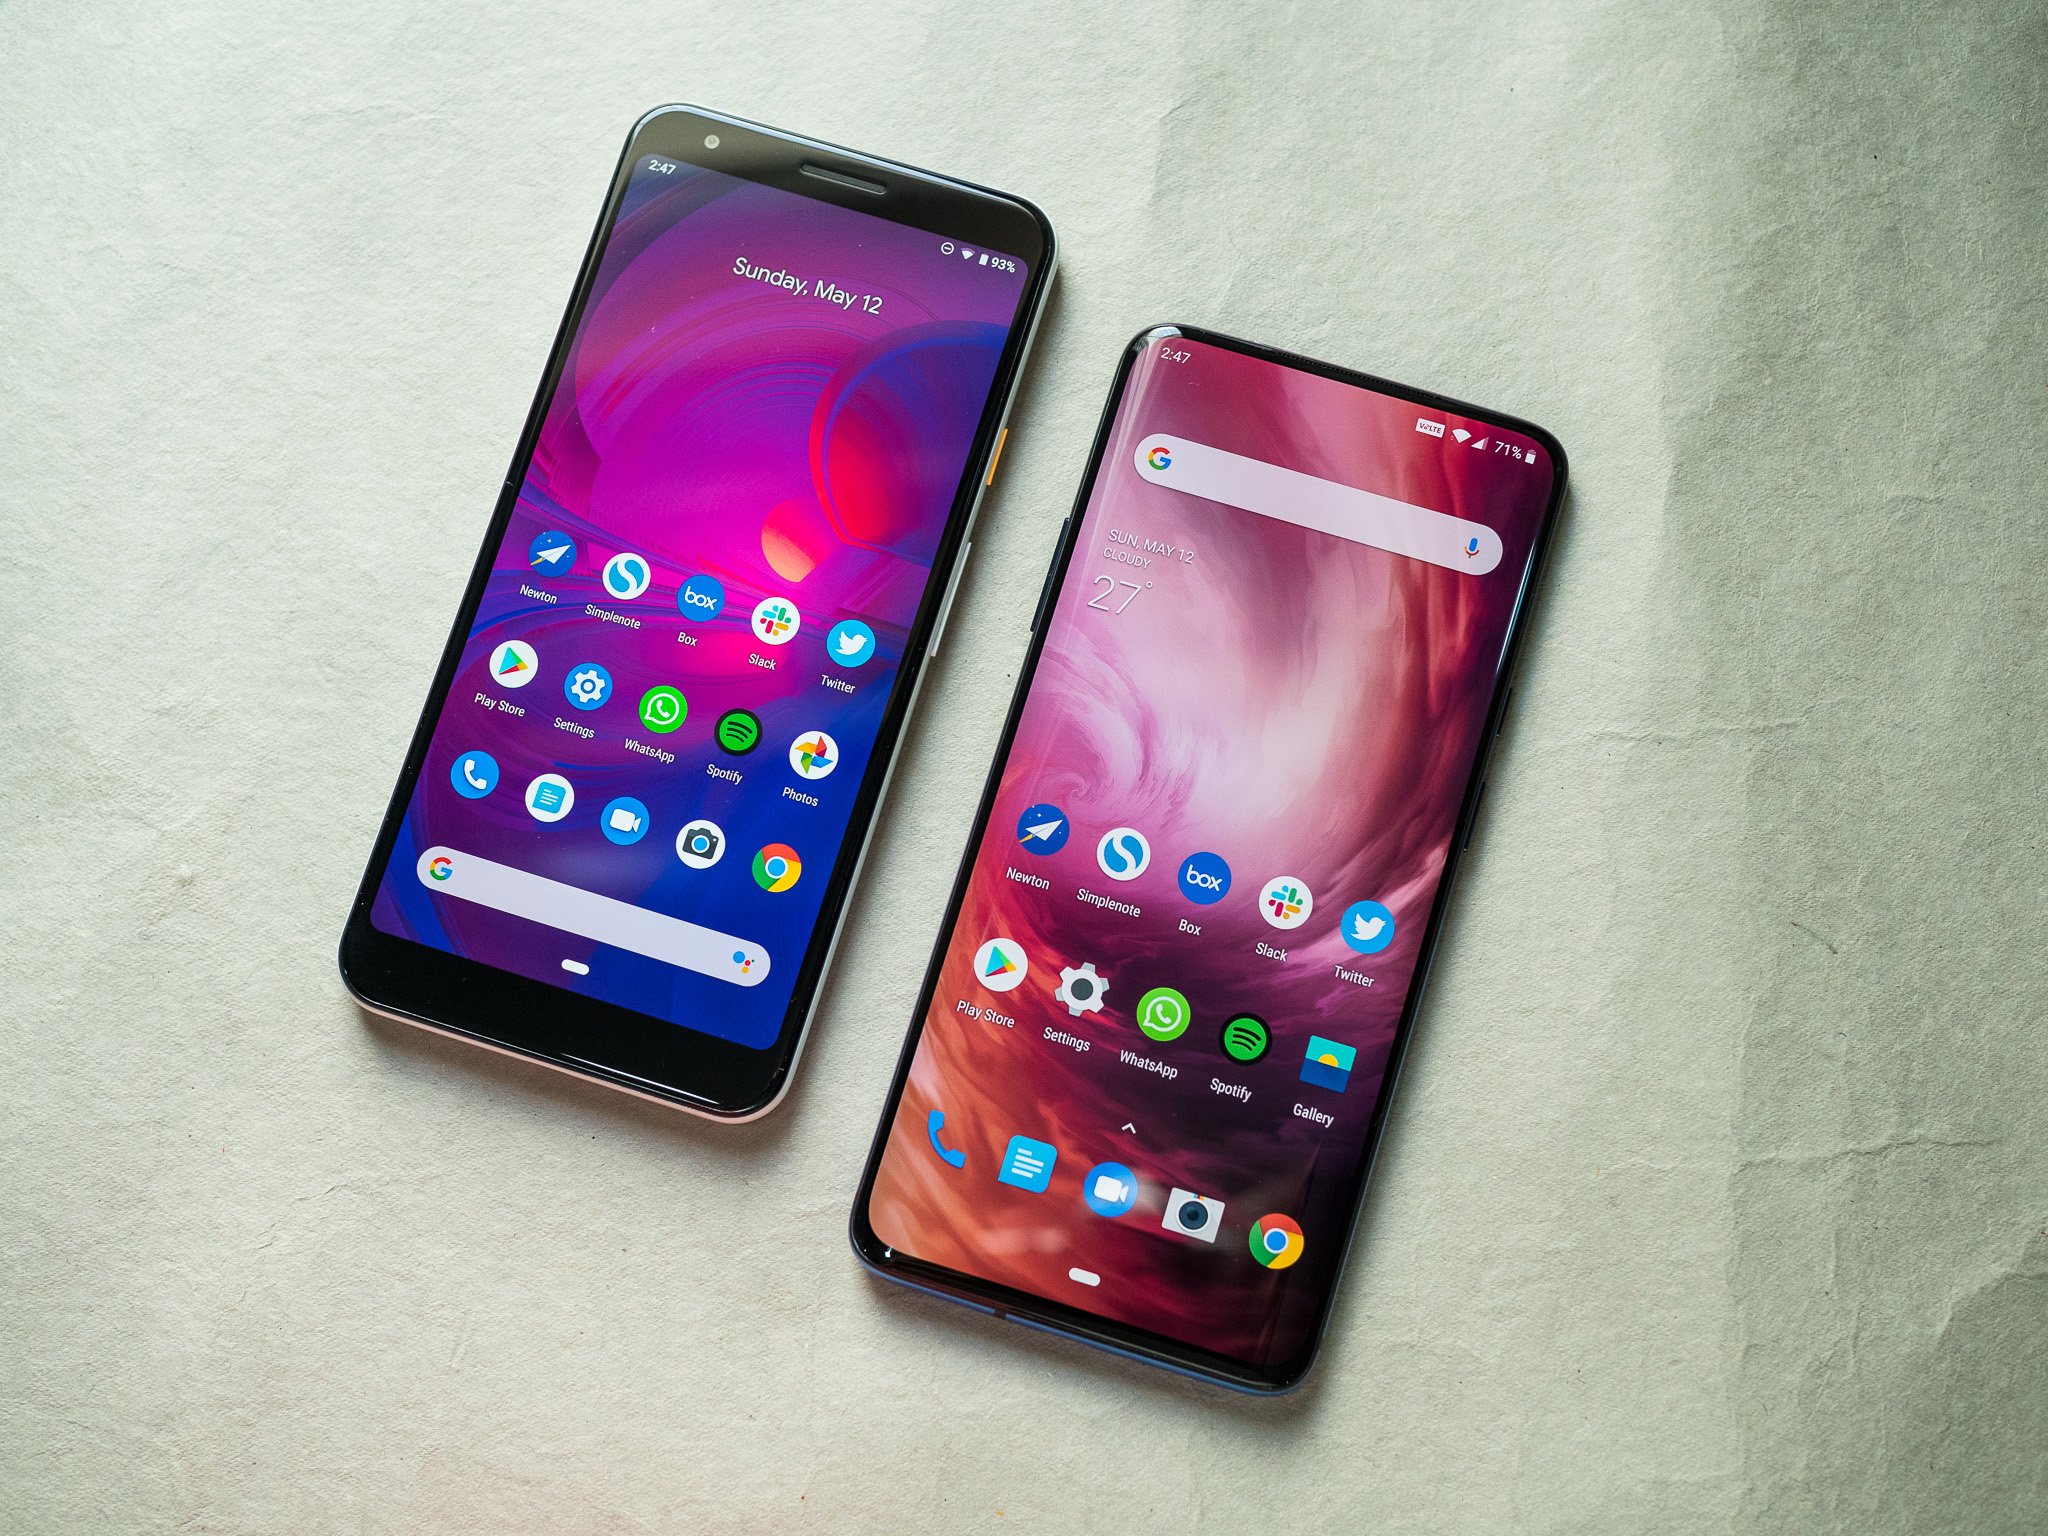 Pixel 3a XL and OnePlus 7 Pro